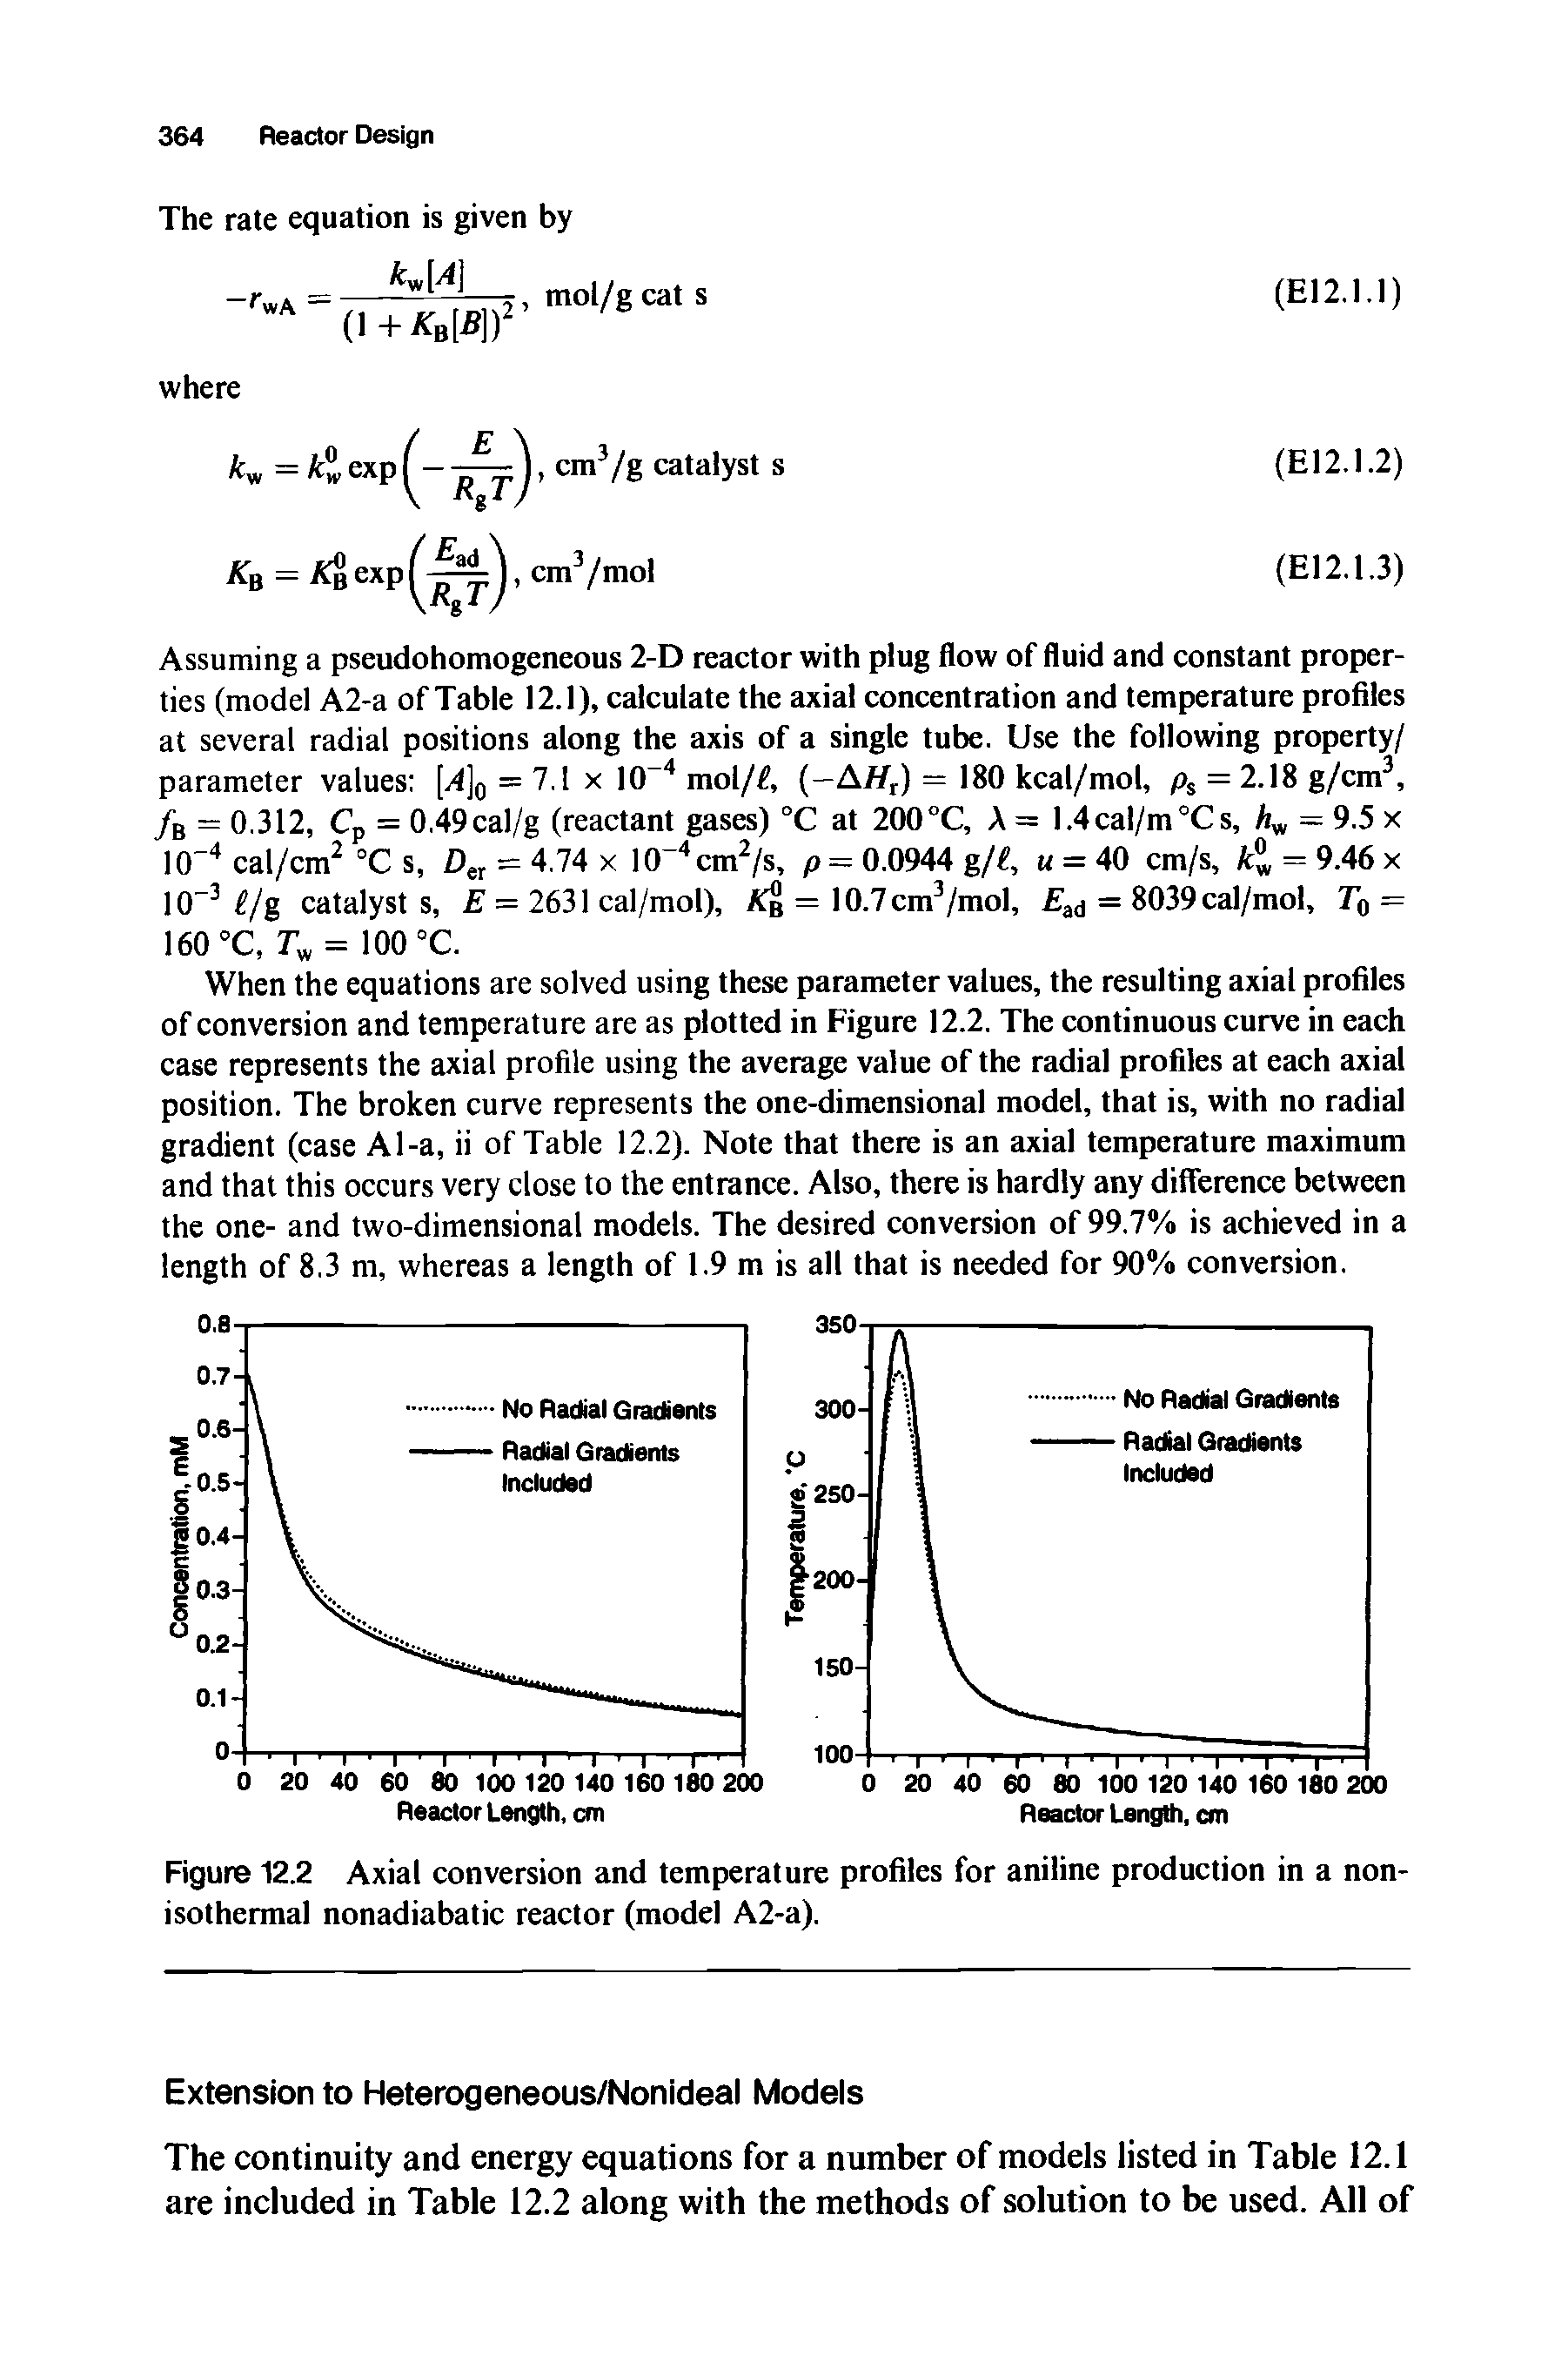 Figure 12.2 Axial conversion and temperature profiles for aniline production in a non-isothermal nonadiabatic reactor (model A2-a).